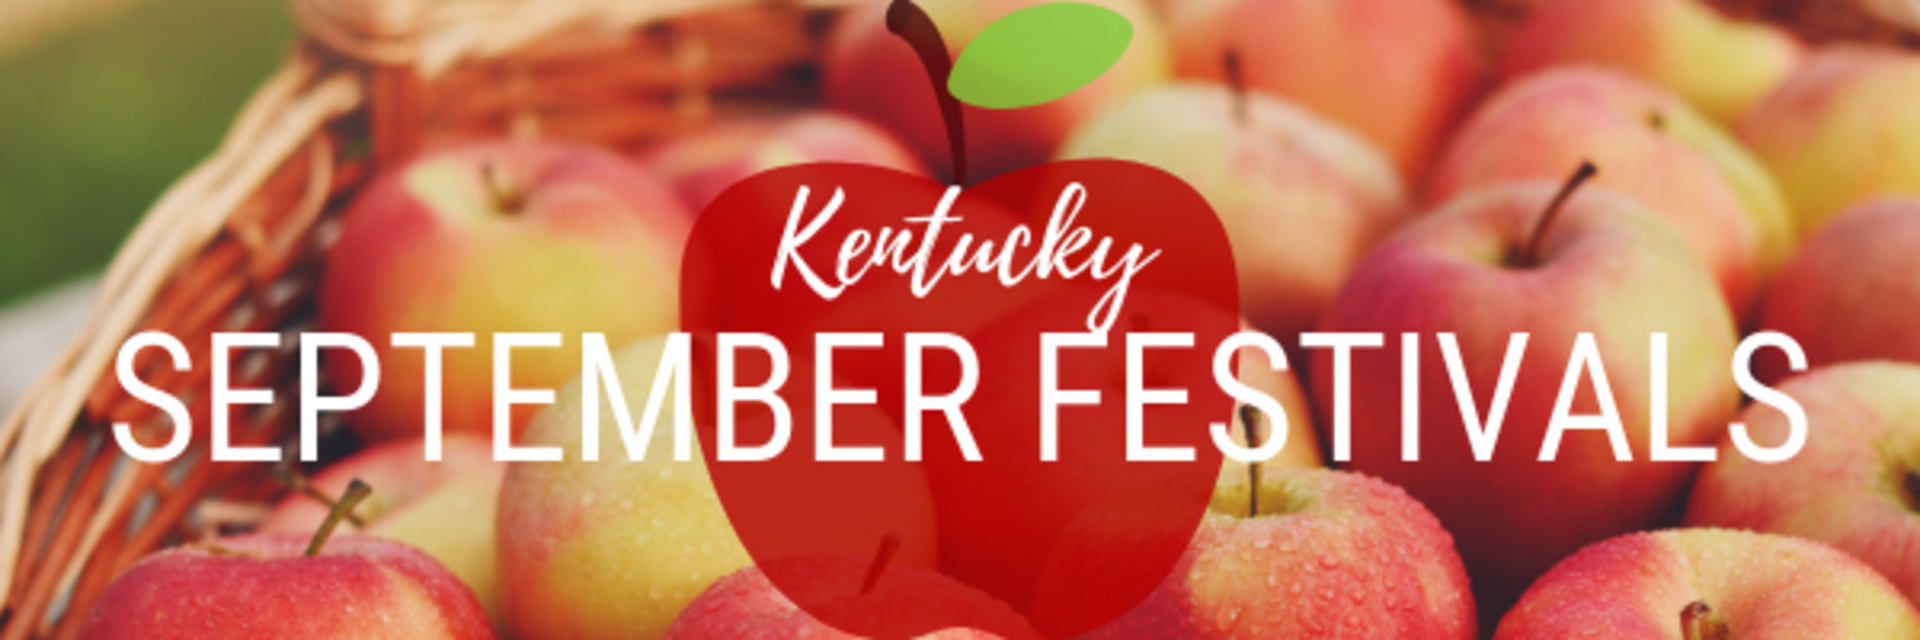 Things to do in Kentucky in September